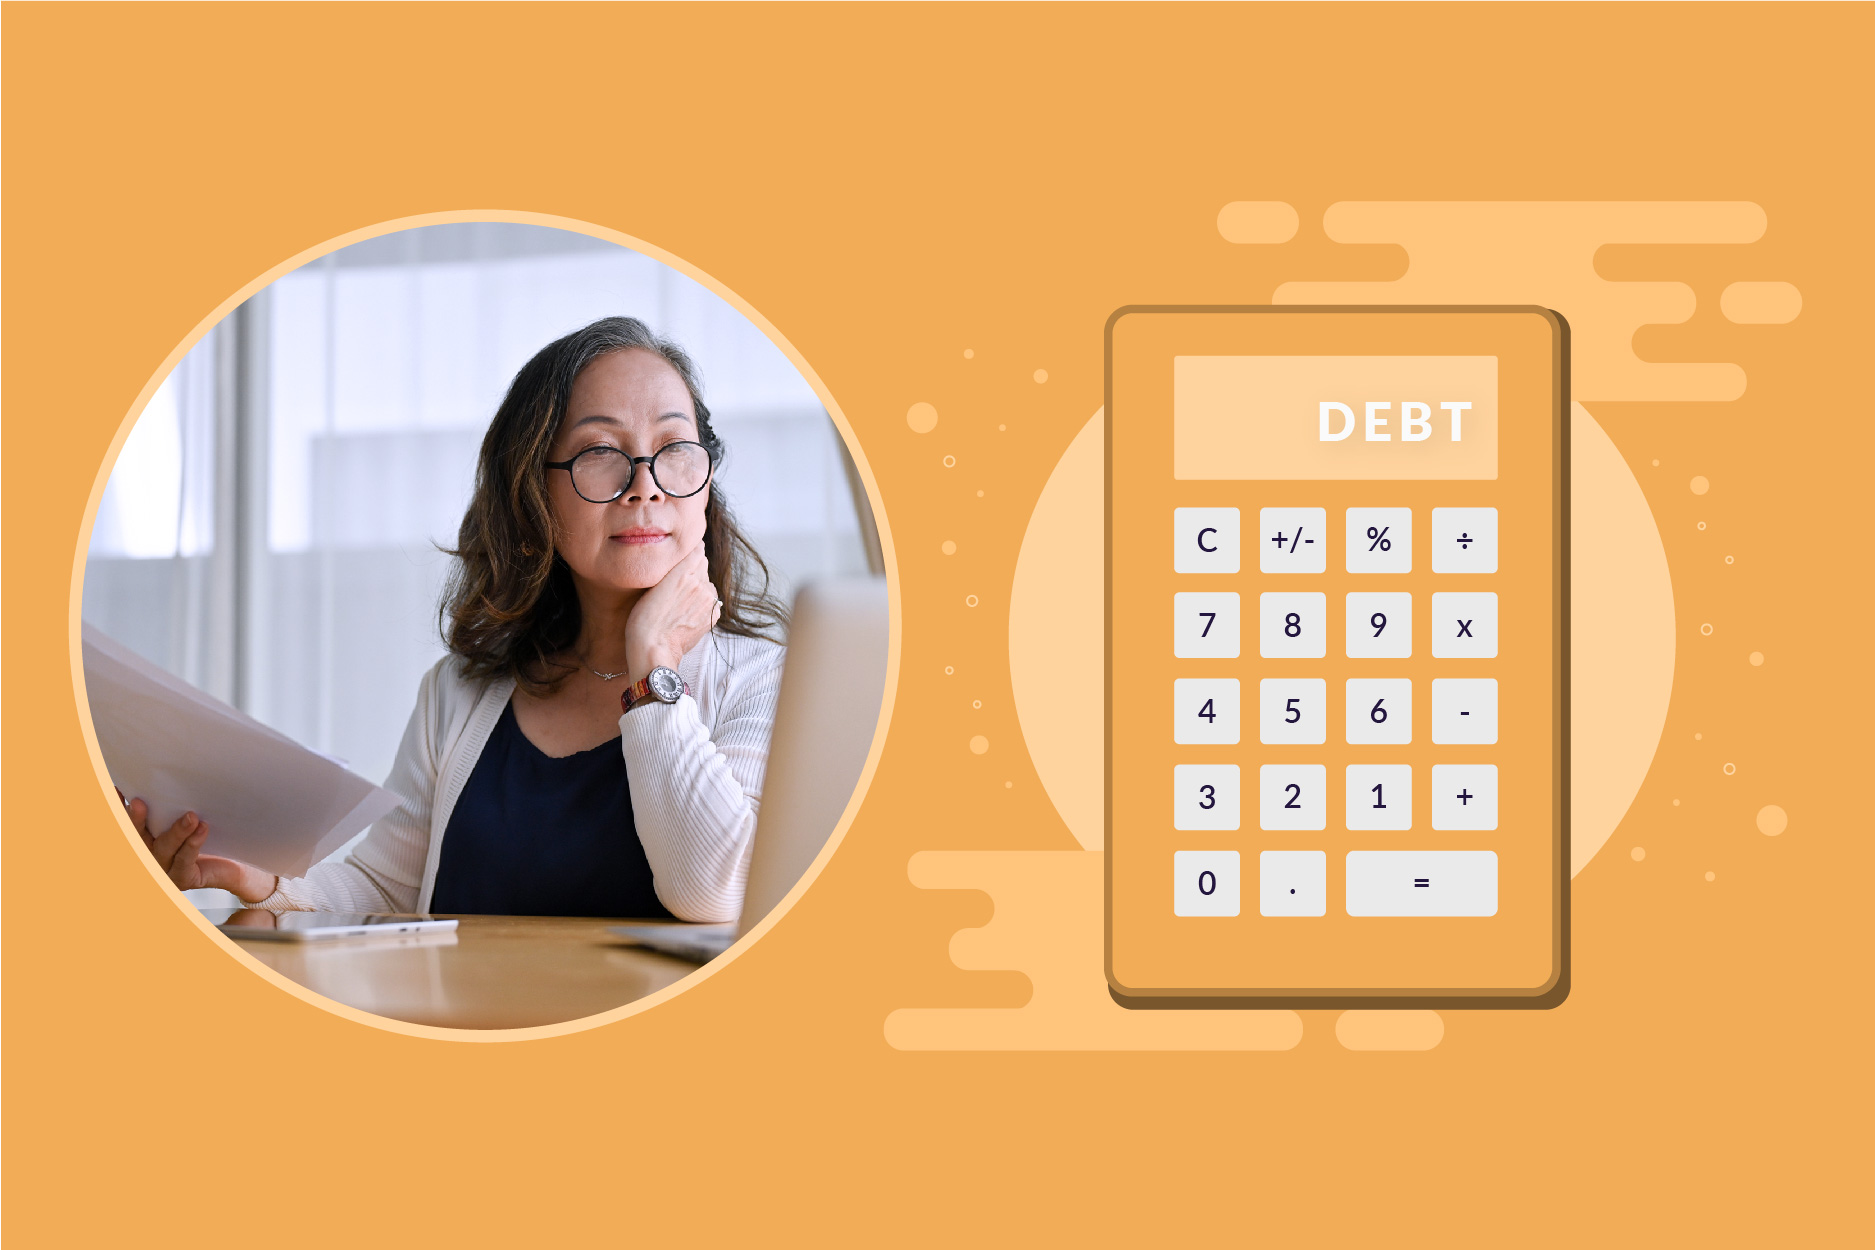 woman looking at her laptop reviewing her finances. And illustration of a calculator with text "debt"